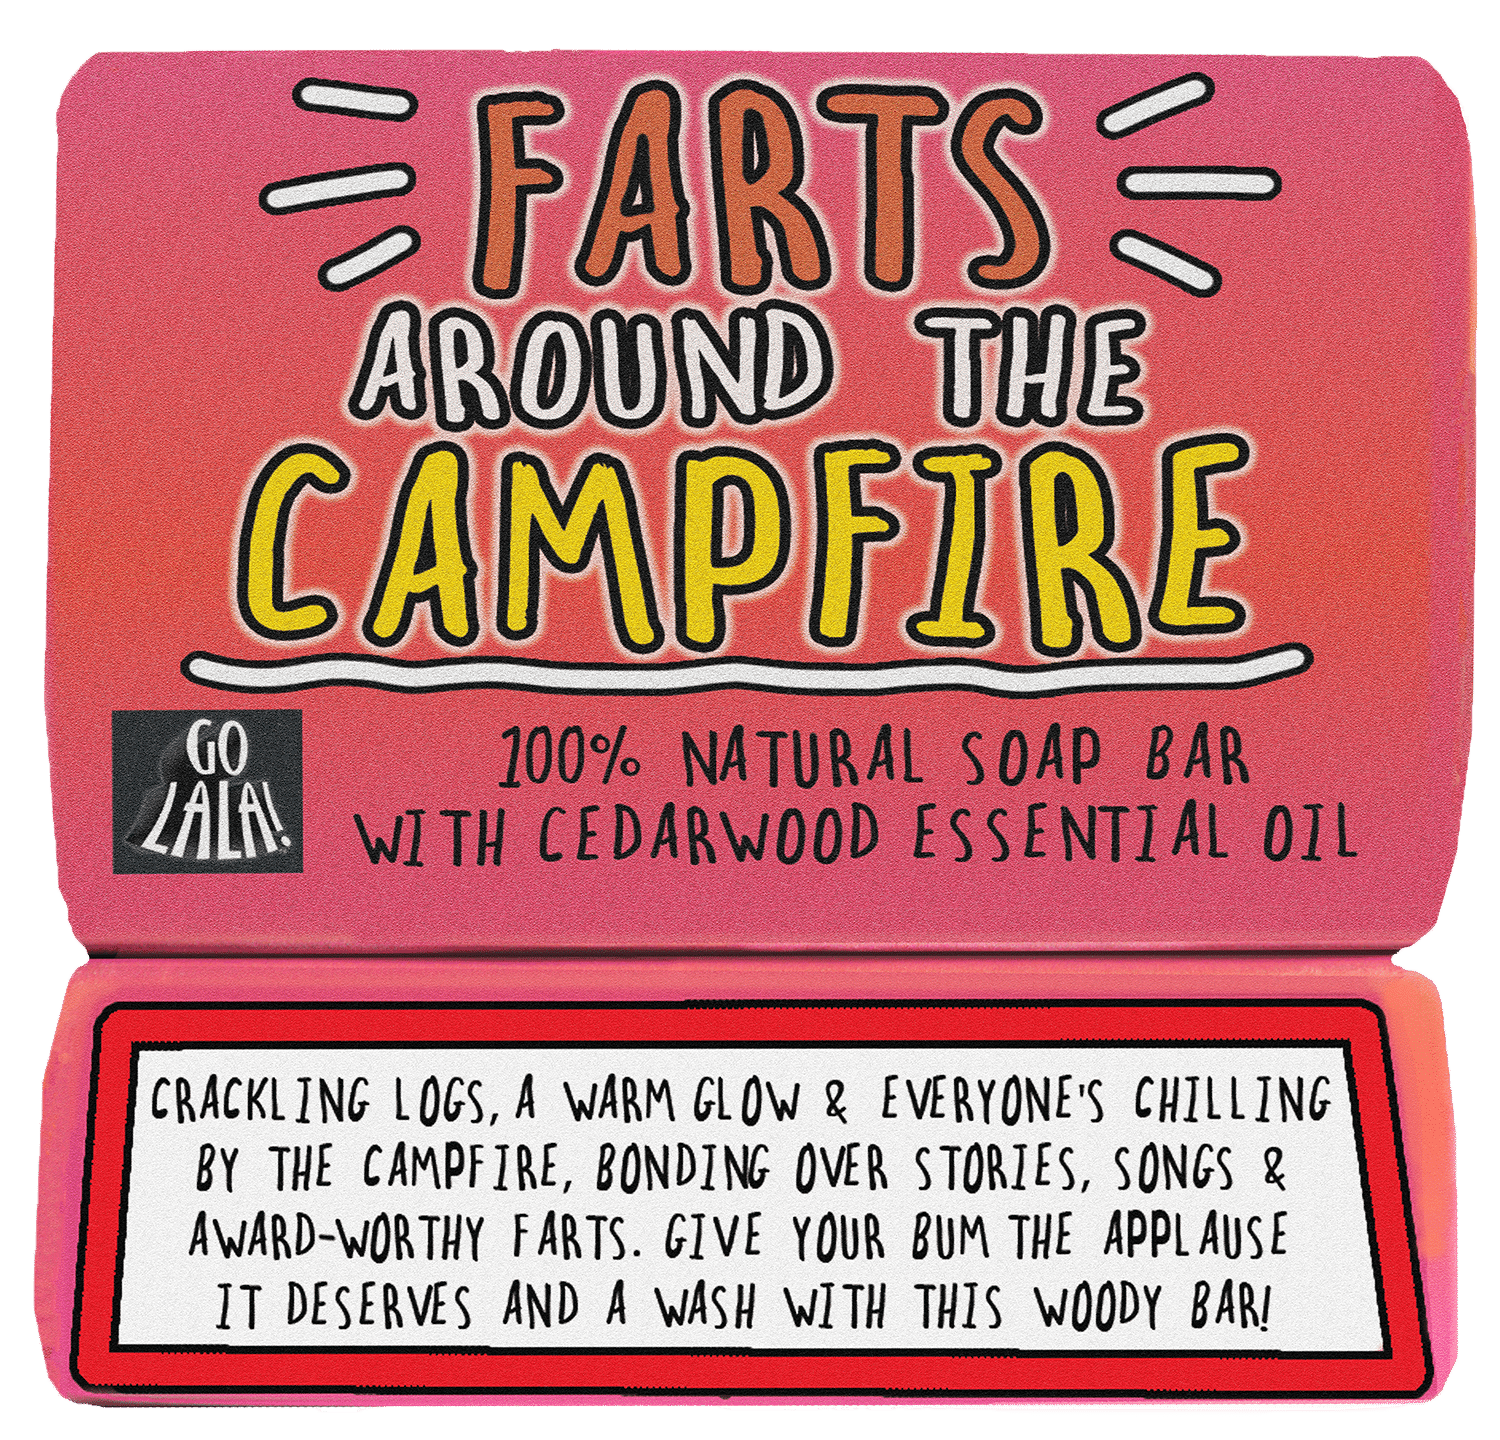 Funny Soap Bar - Farts around the Campfire - Perfect for Camping, Festivals, Travelling